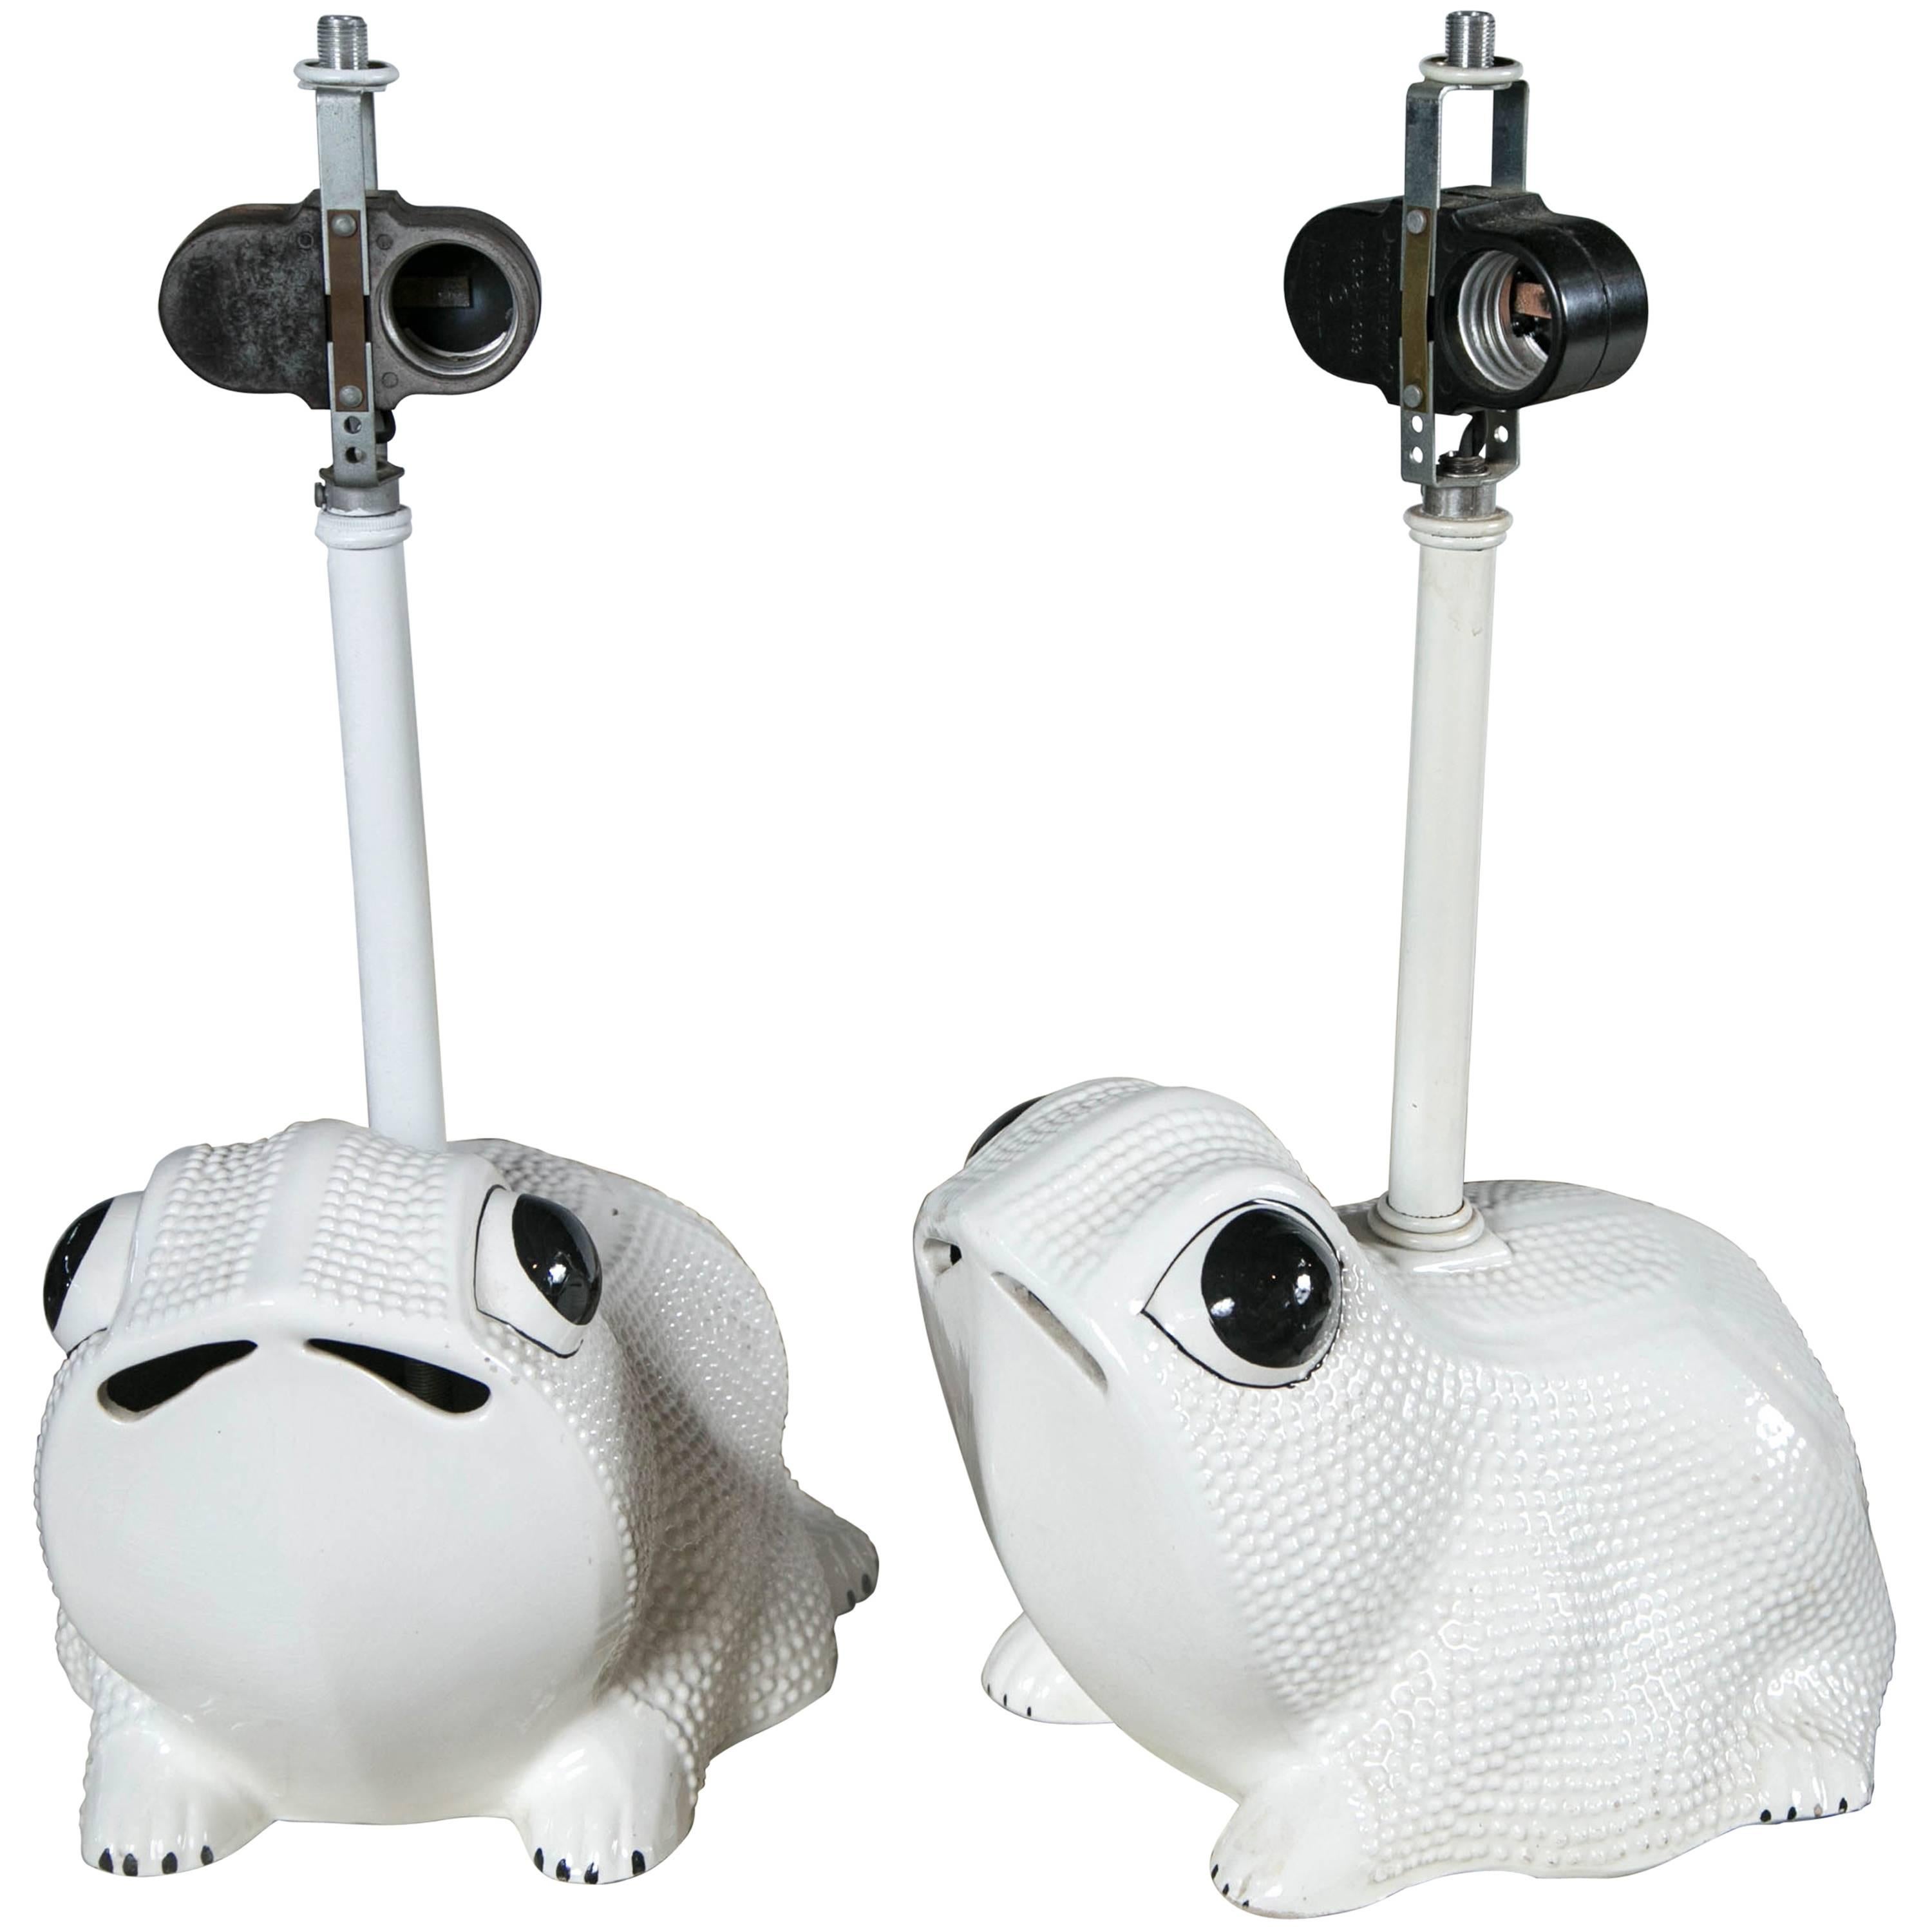 Frog Lamps